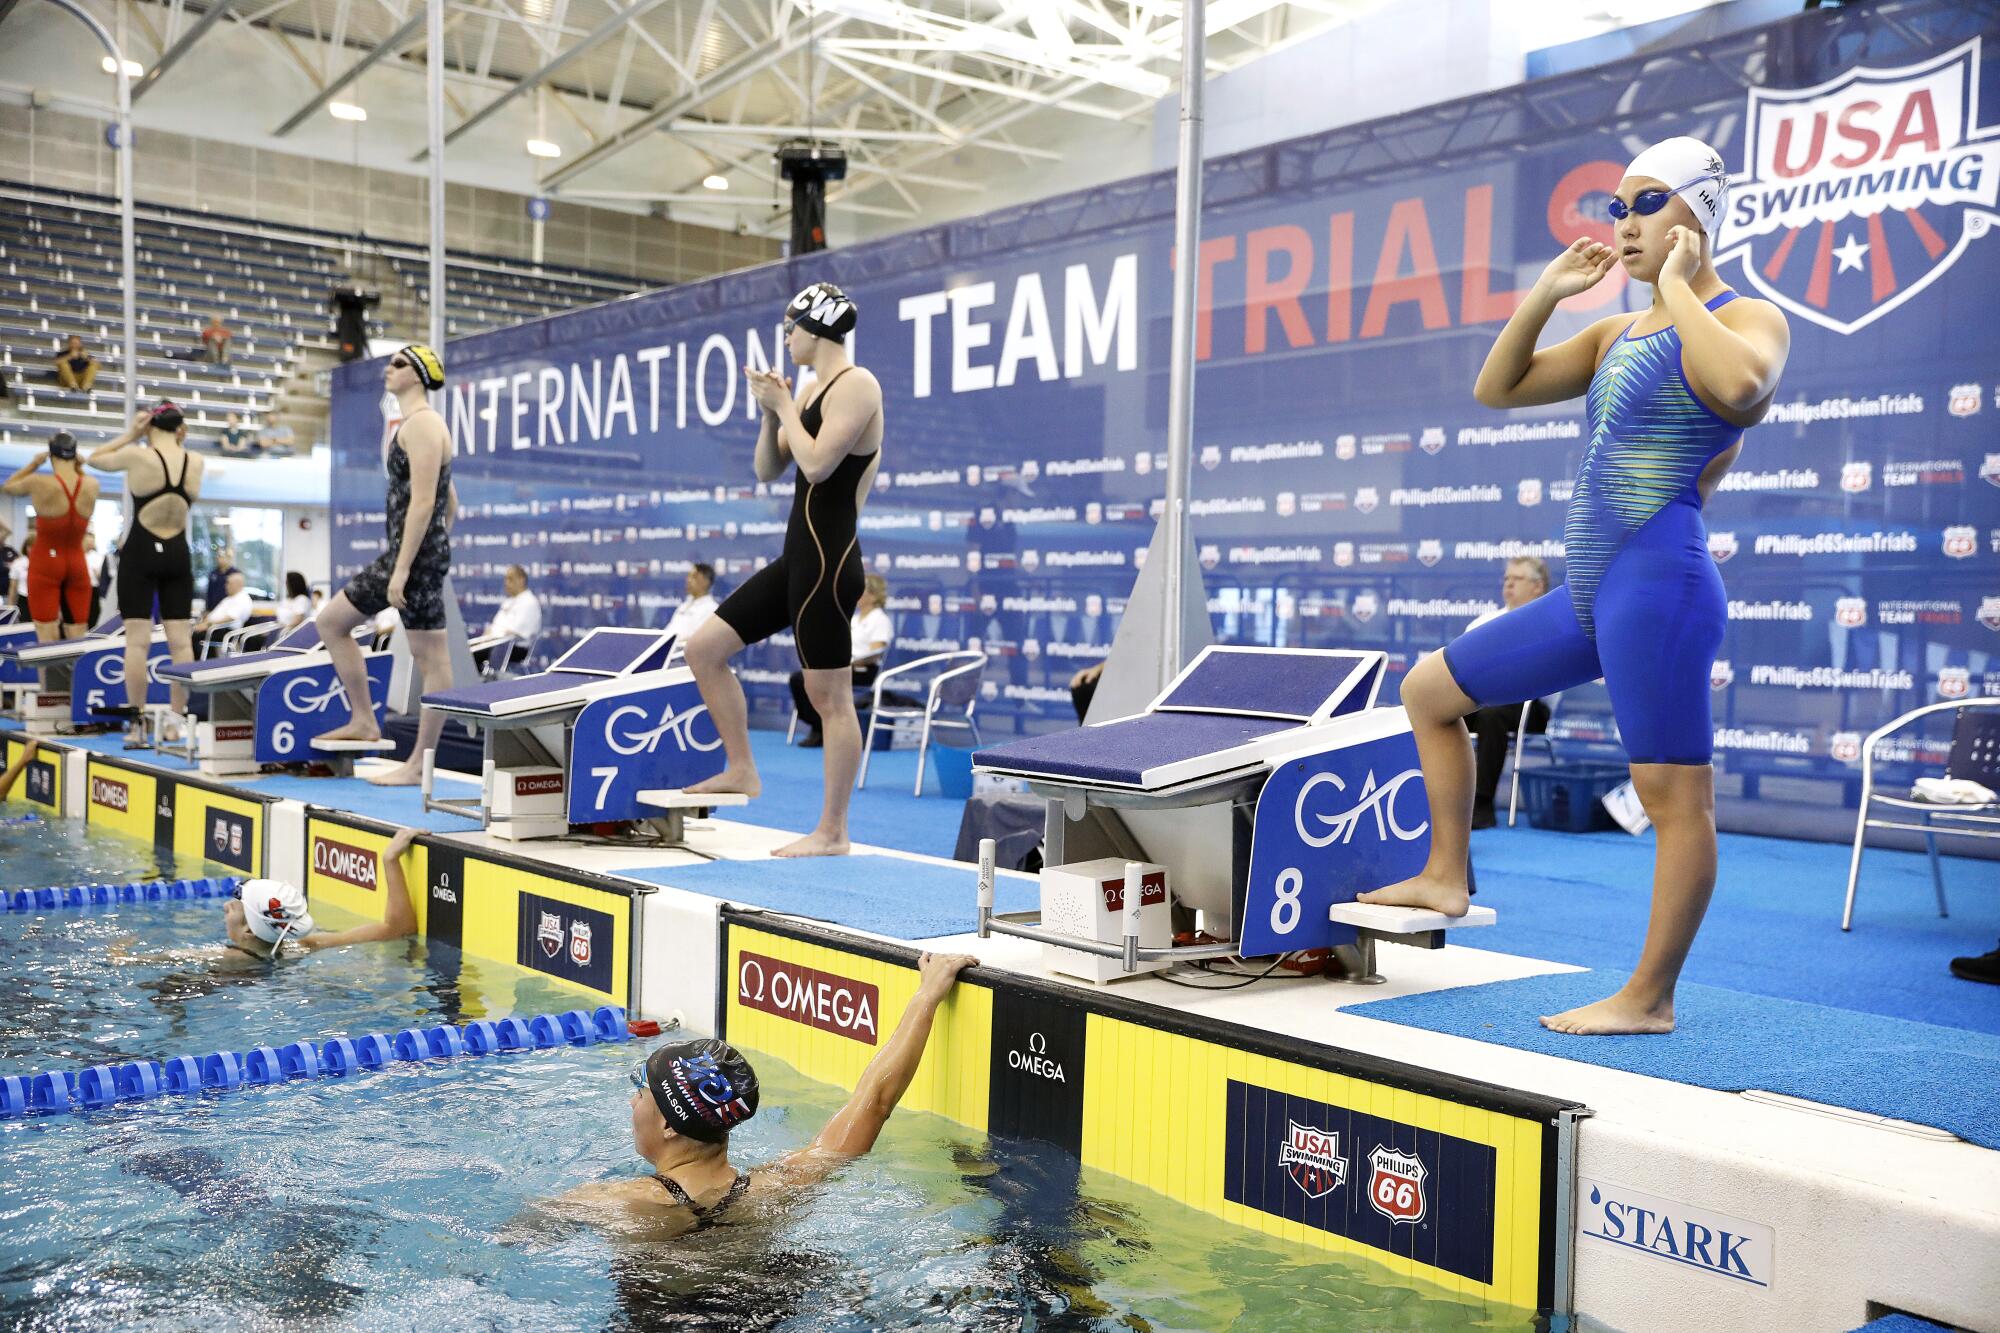 Kayla Han, right, competes in the 2022 Phillips 66 International Team Trials.